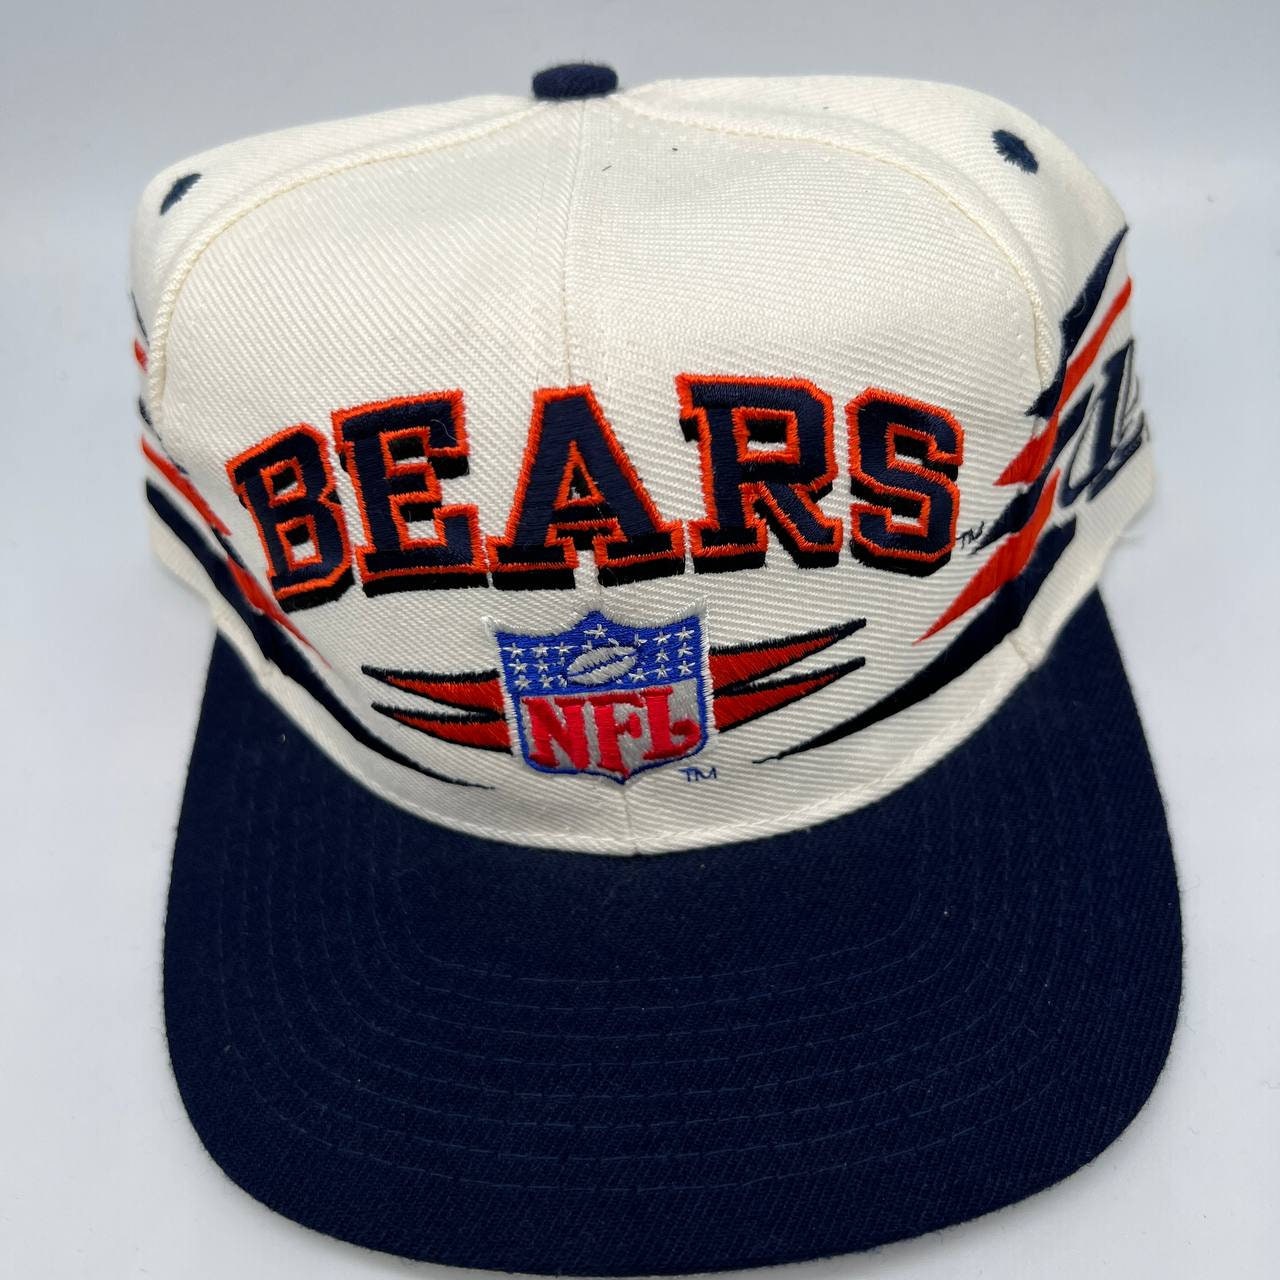 Vintage Chicago Bears Snapback Hat Cap 90s Christmas Vacation Clark Griswold